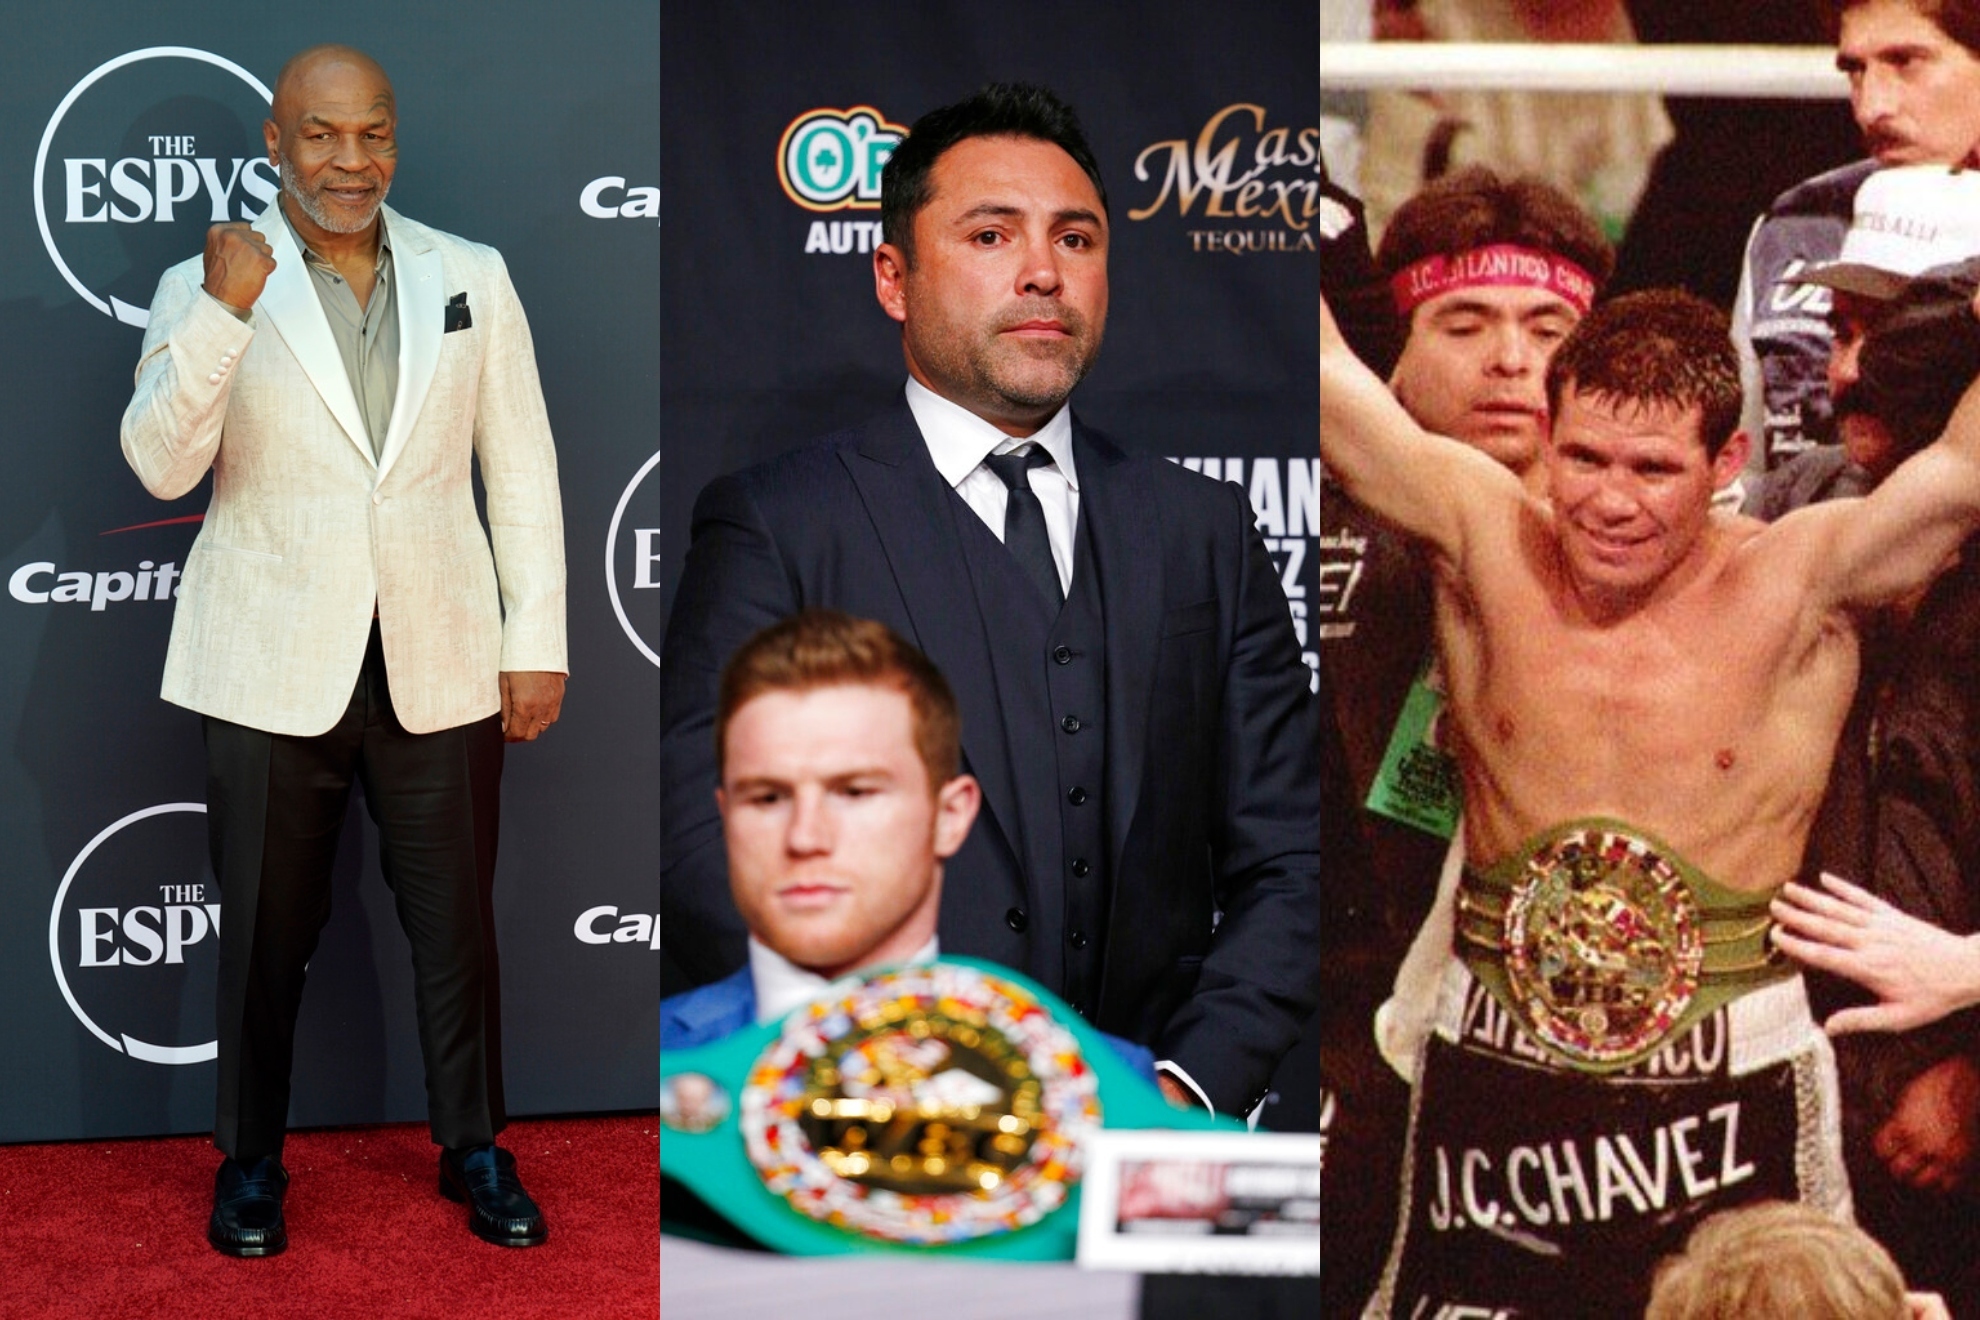 Mike Tyson, Julio Cesar Chavez, Oscar de la Hoya, and other legends weigh in on Canelos exit from PBC